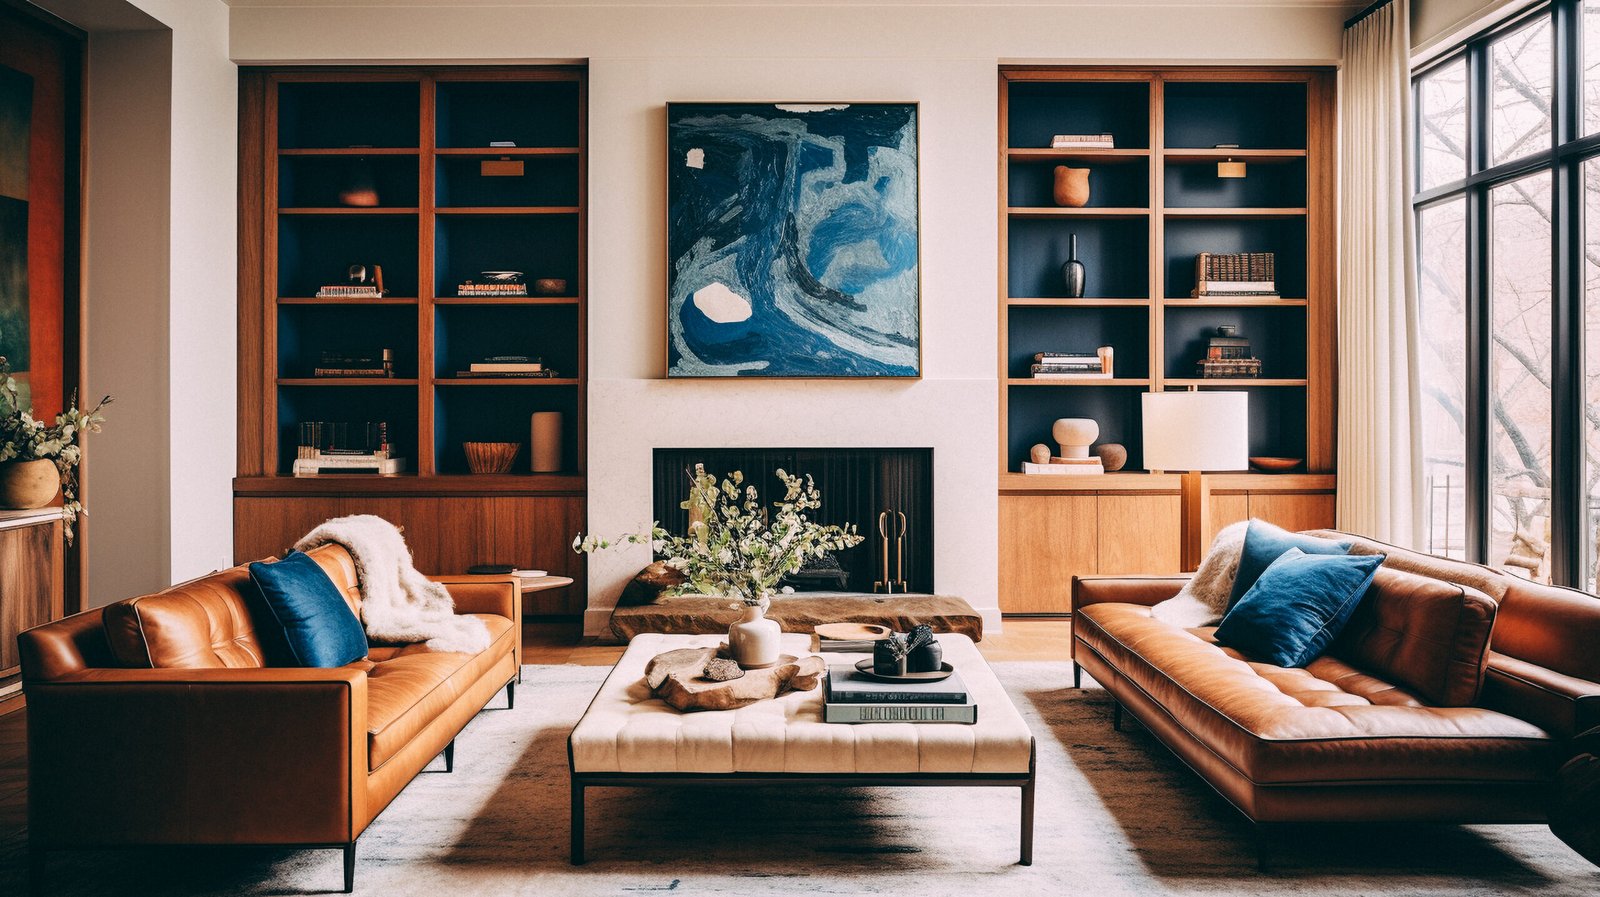 Mid century modern living room with two leather sofas and a blue print on the wall.